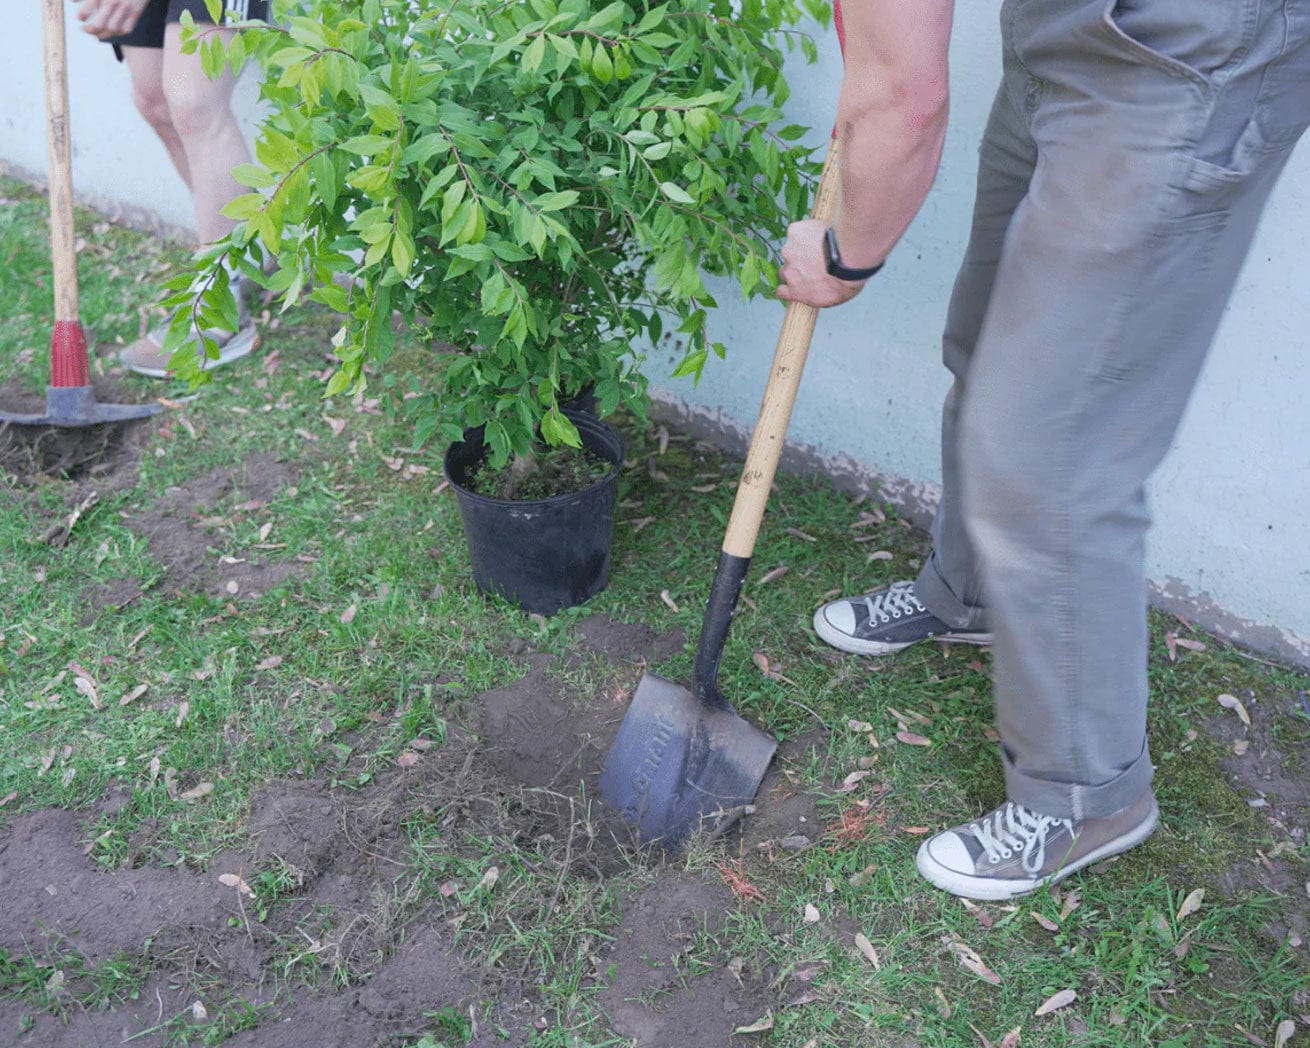 Urban Tree Planting is Booming, Just Not In Low-Income and Minority  Neighborhoods